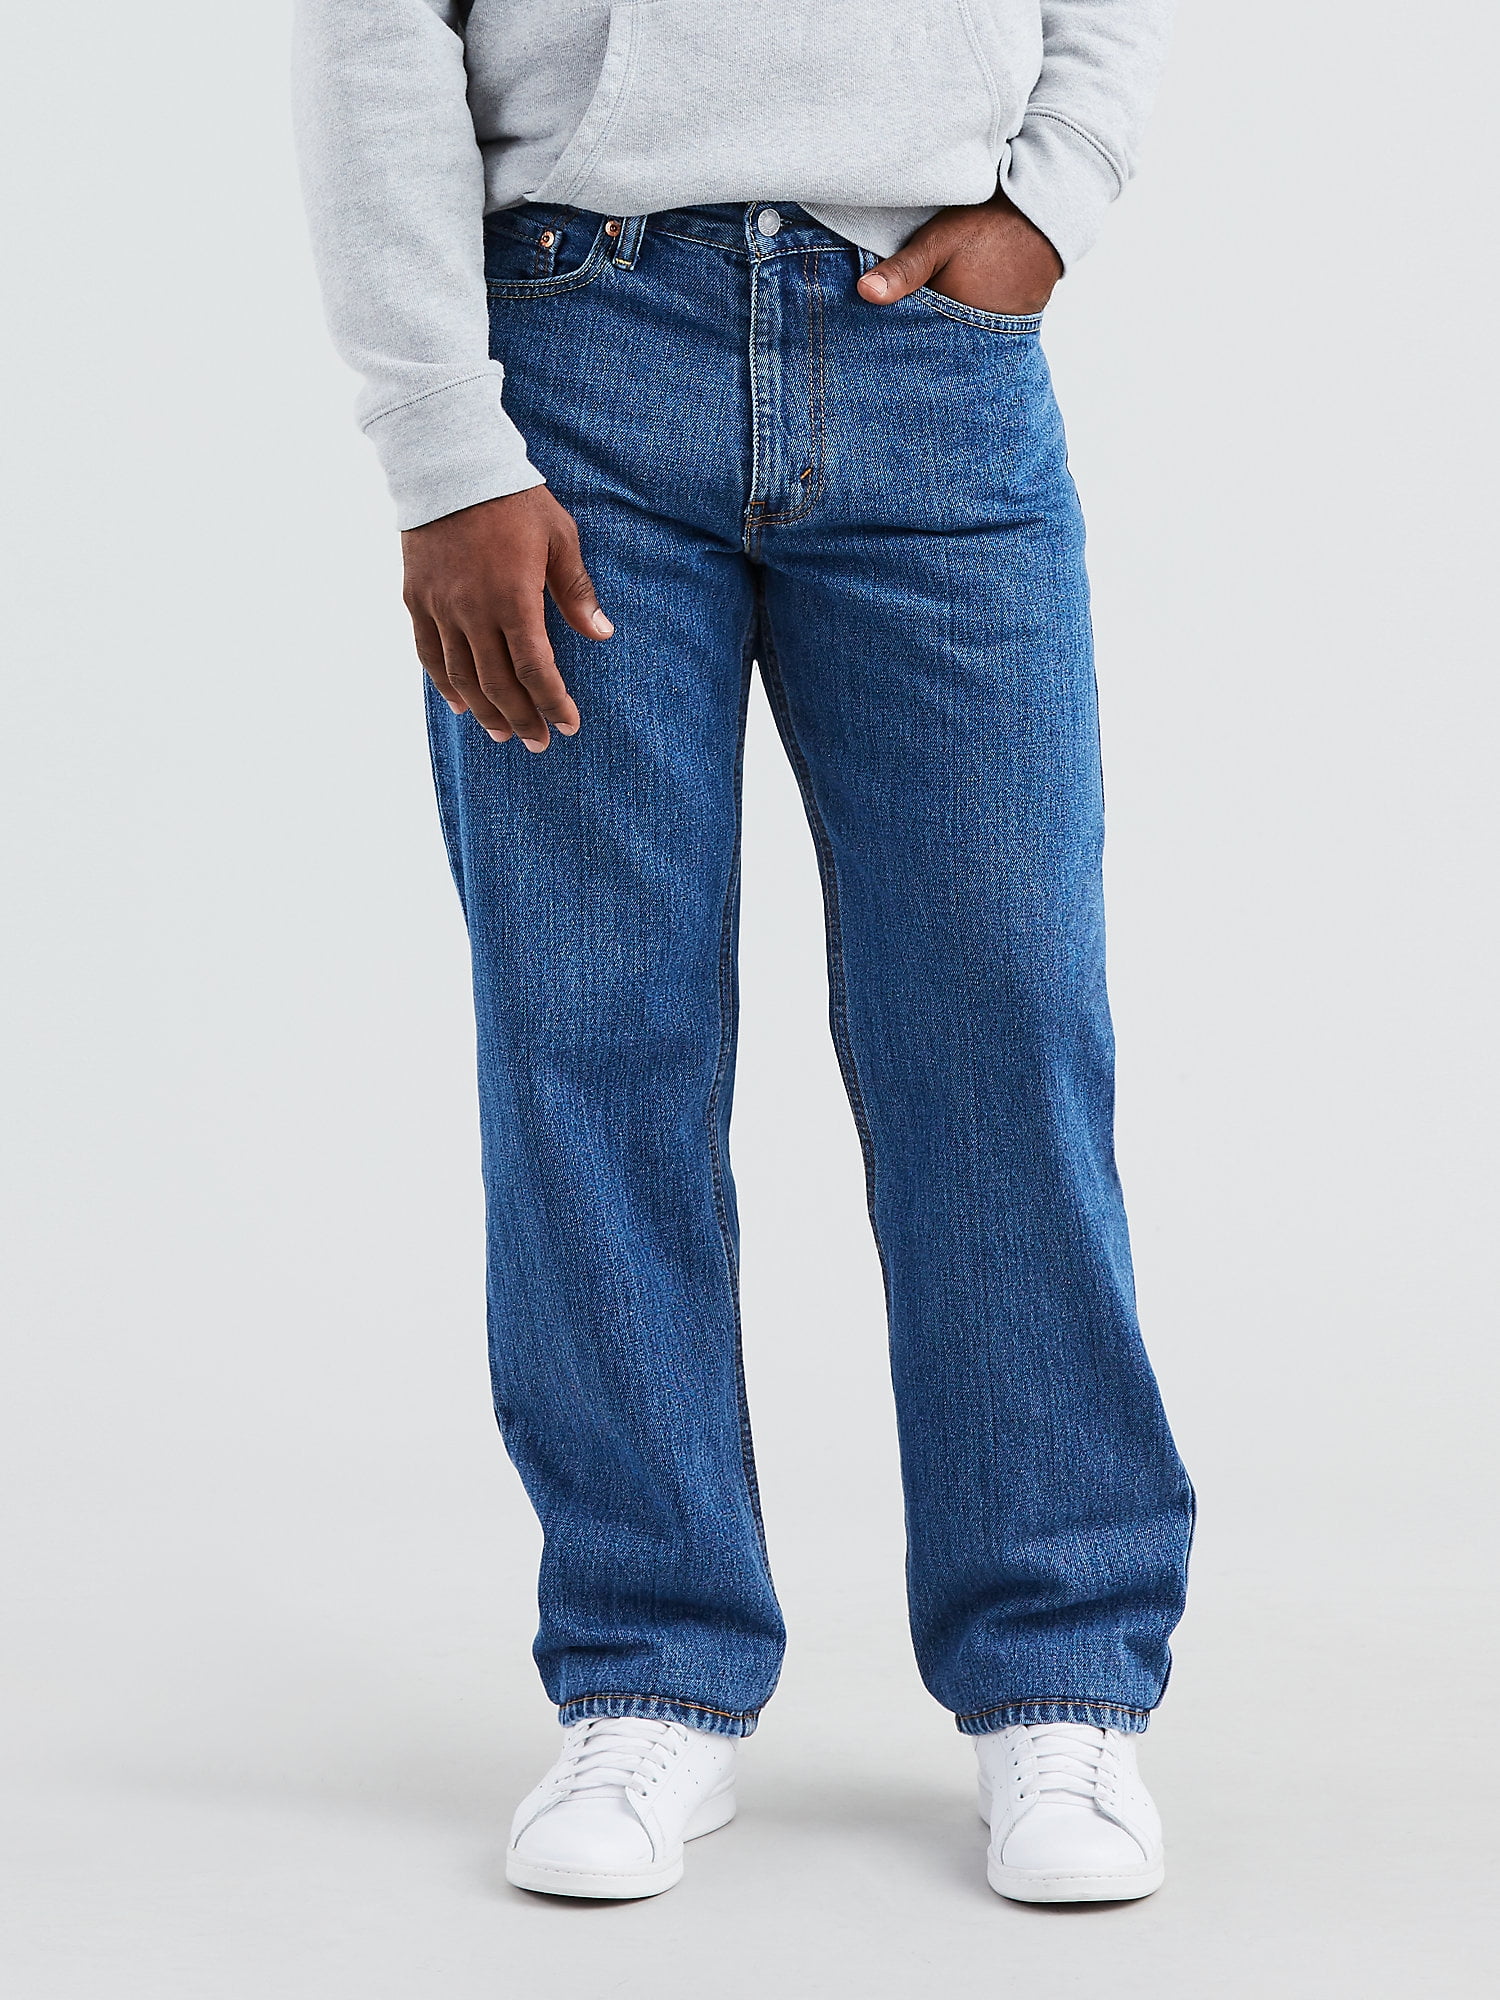 Levi’s Mens 550 Relaxed Fit Jeans 